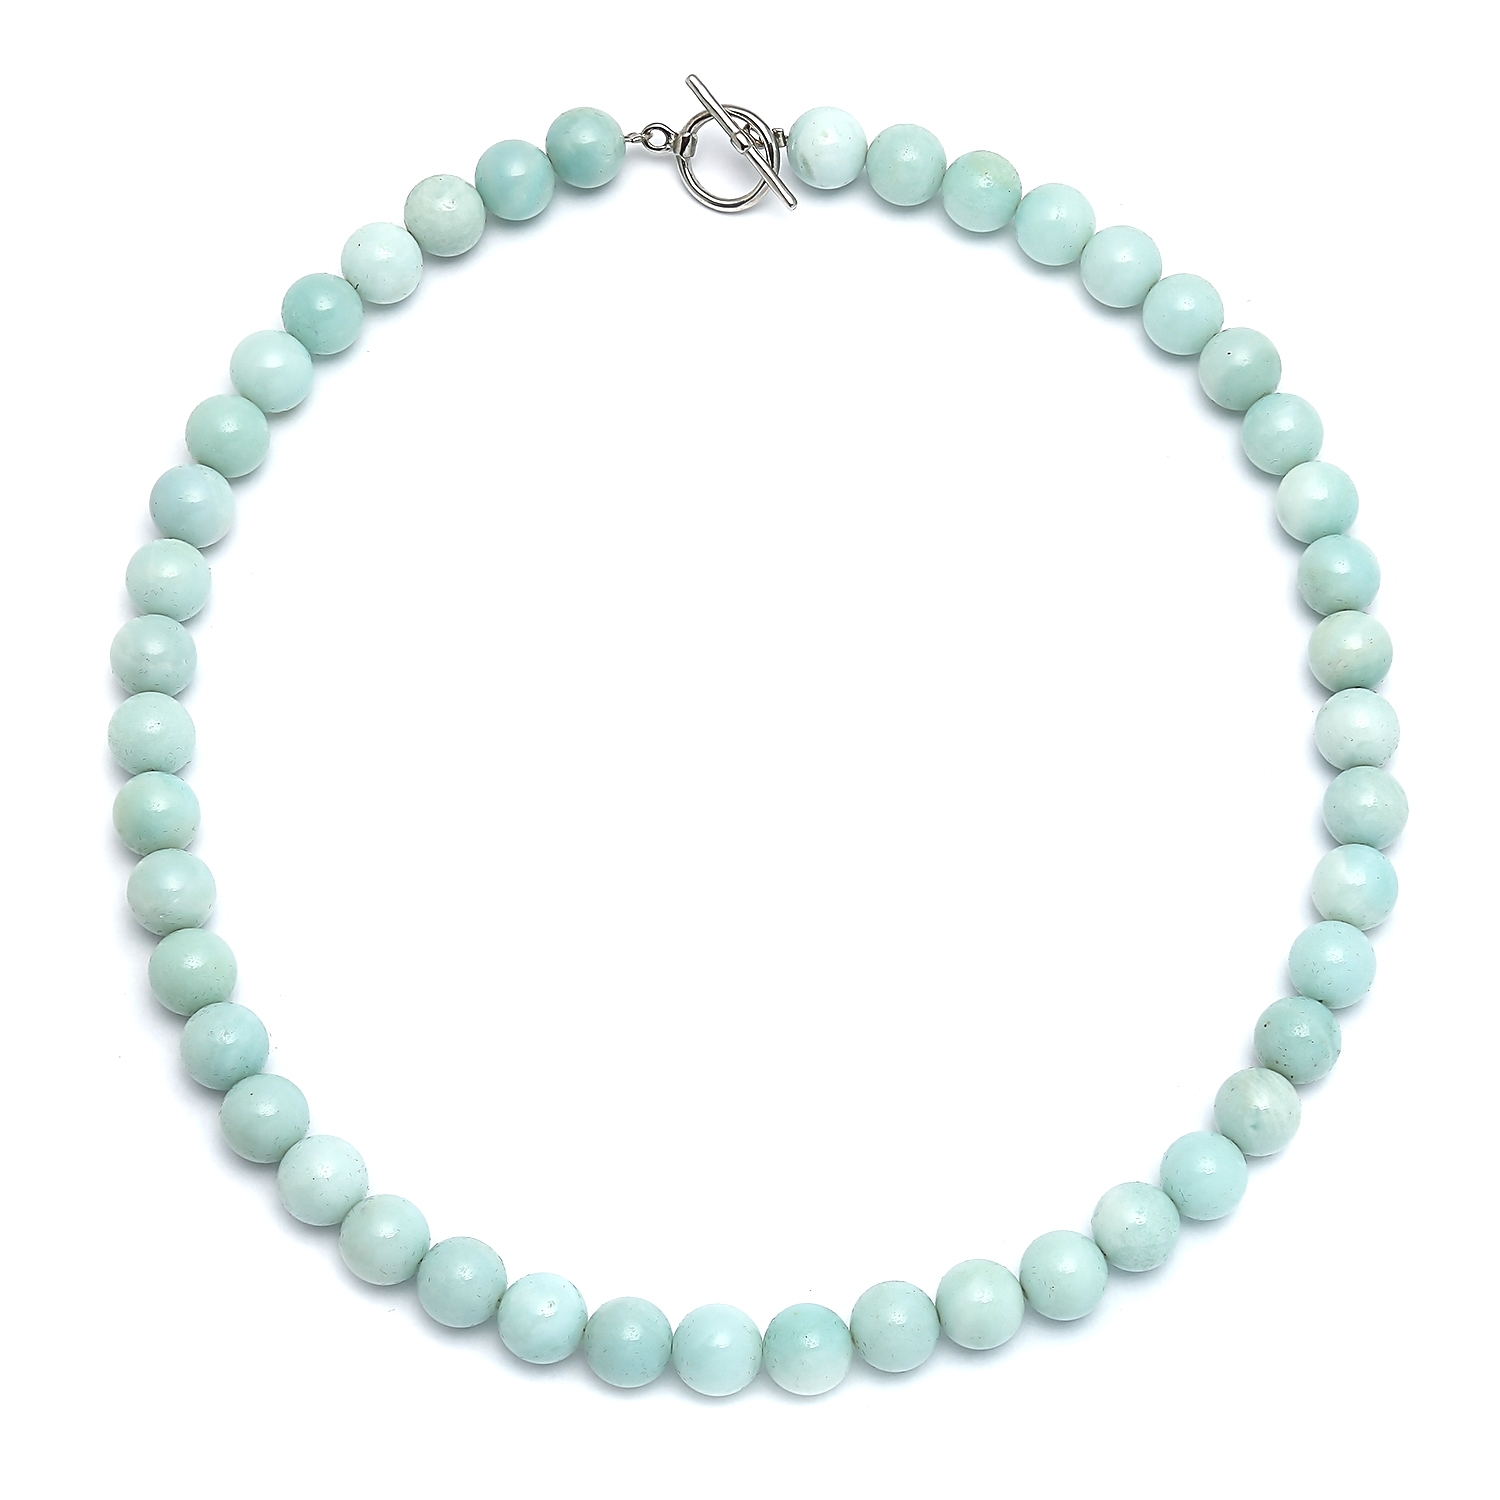 bling jewelry Amazonite Light Aqua Blue Round Gem Stone 10MM Bead Strand Necklace For Women Silver Plated Clasp 18 Inch